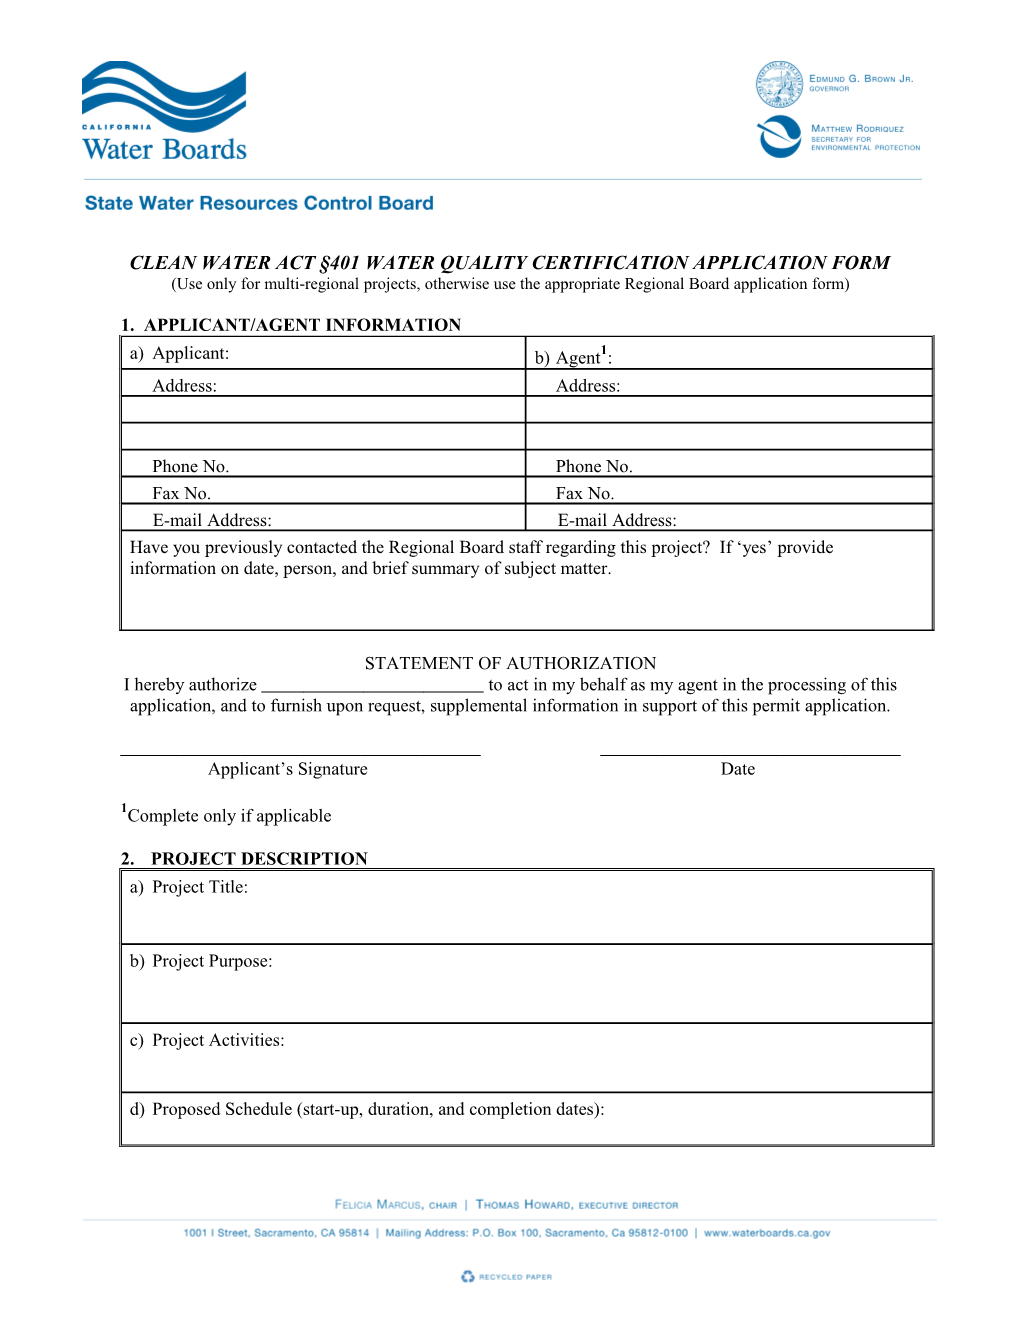 Clean Water Act 401 Water Quality Certification Application Form